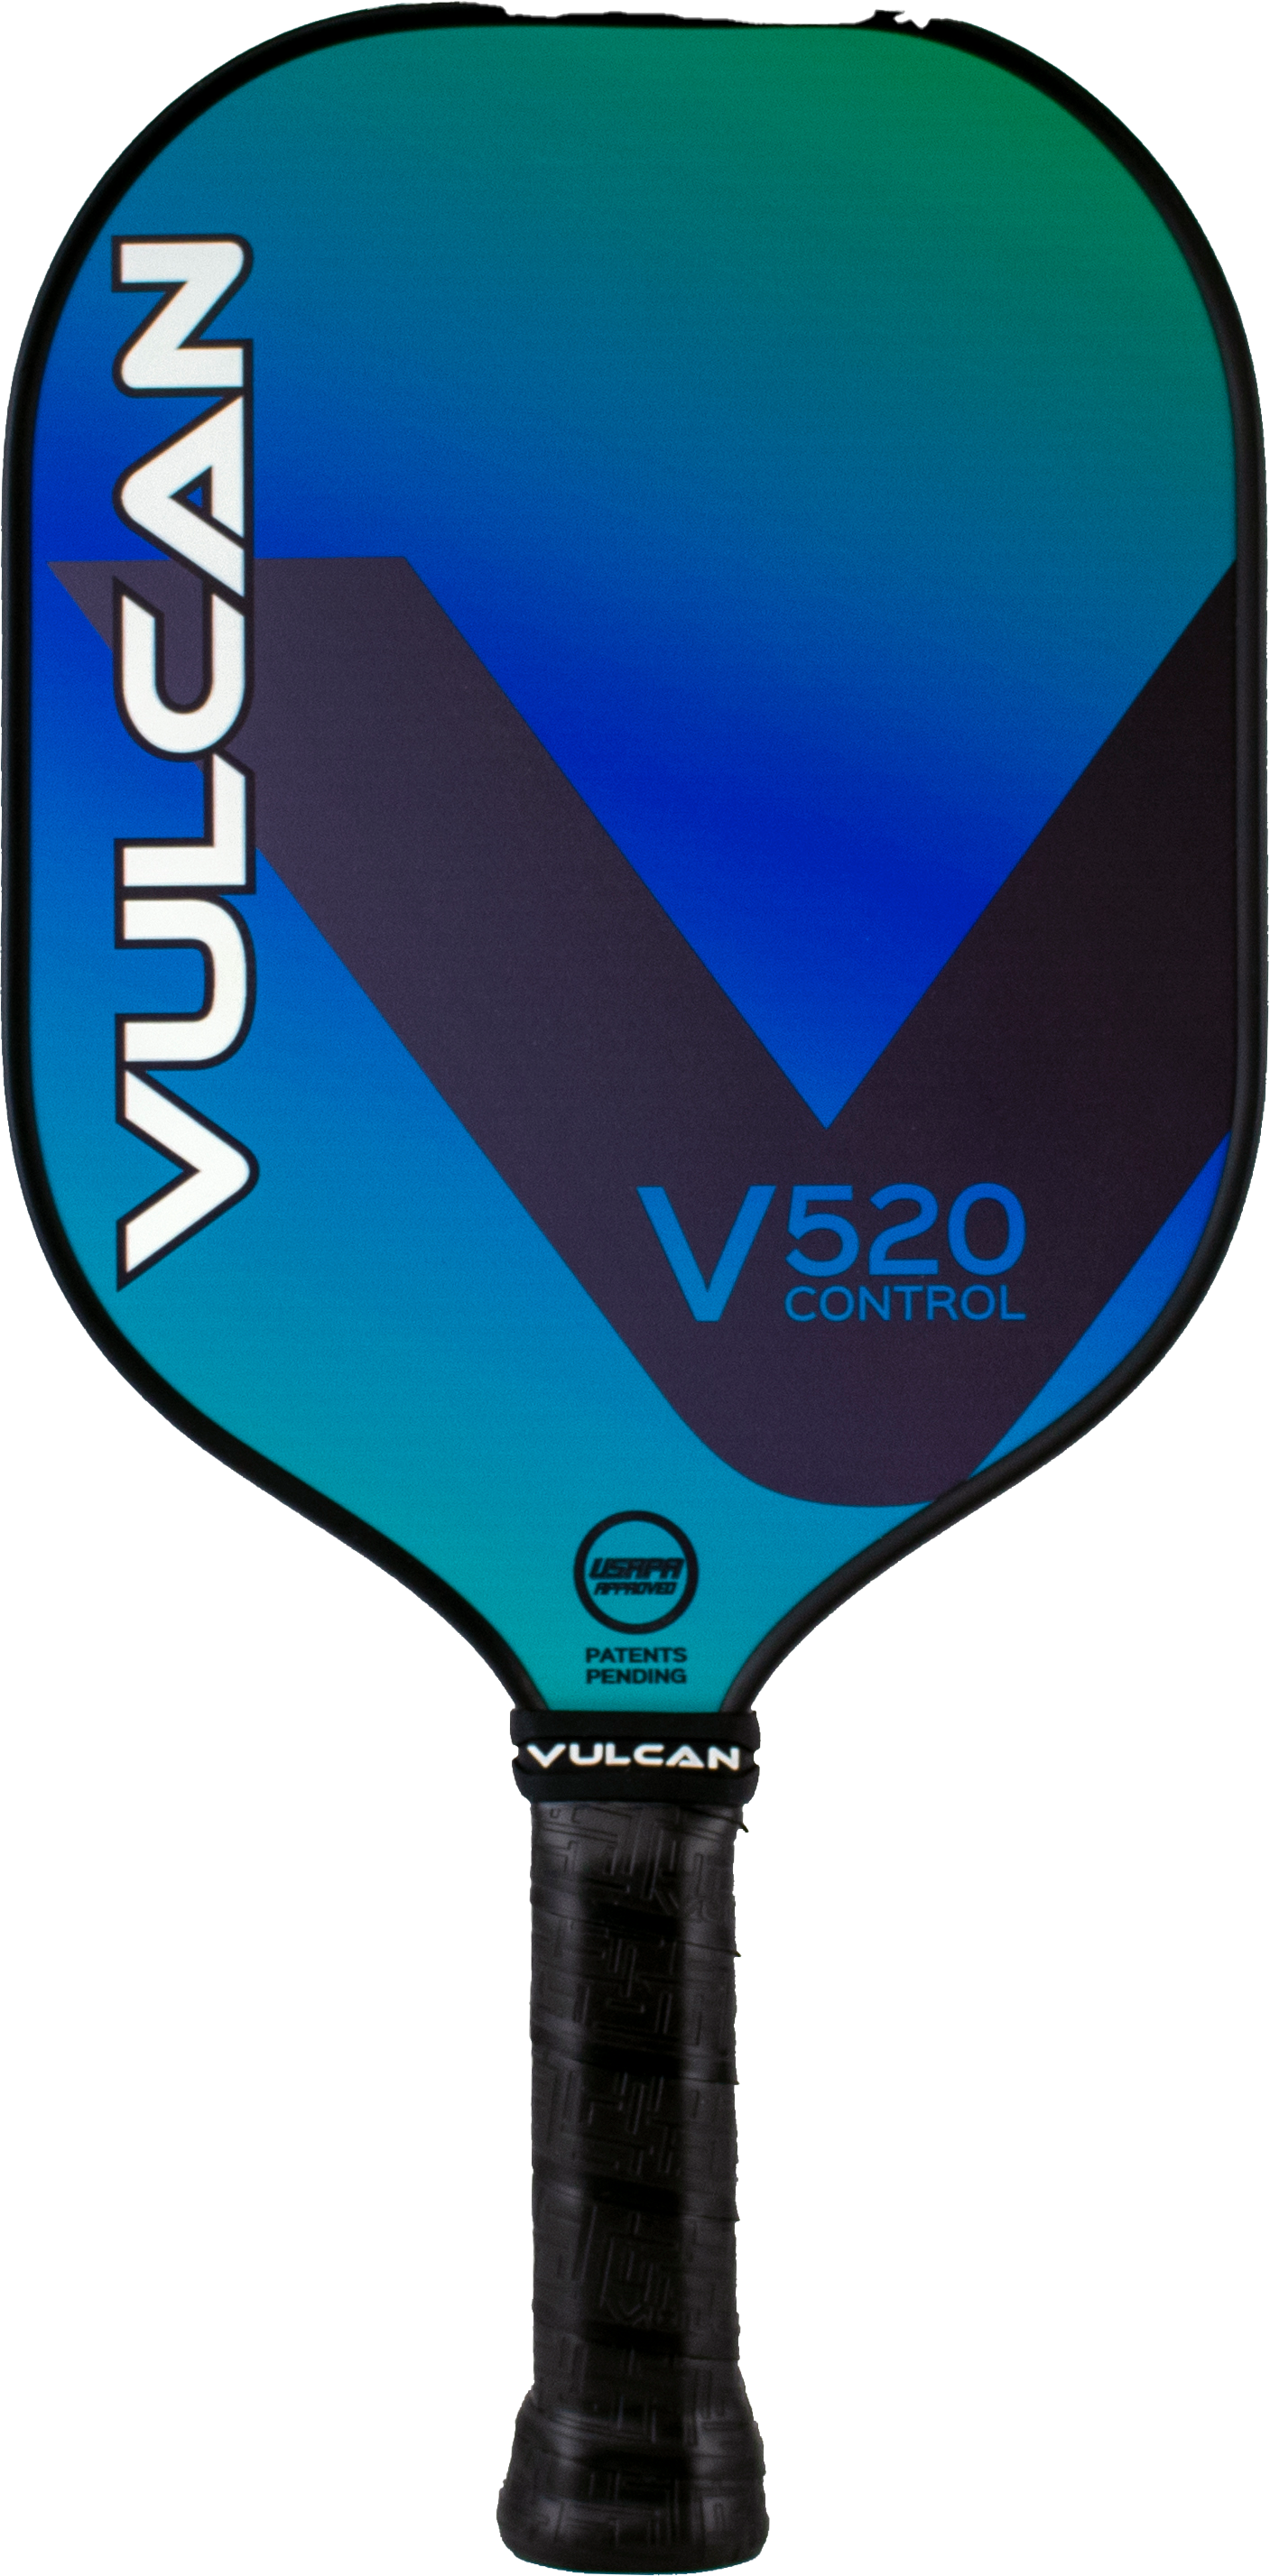 The Vulcan V520 Control pickleball paddle by Vulcan is shown on a white background.